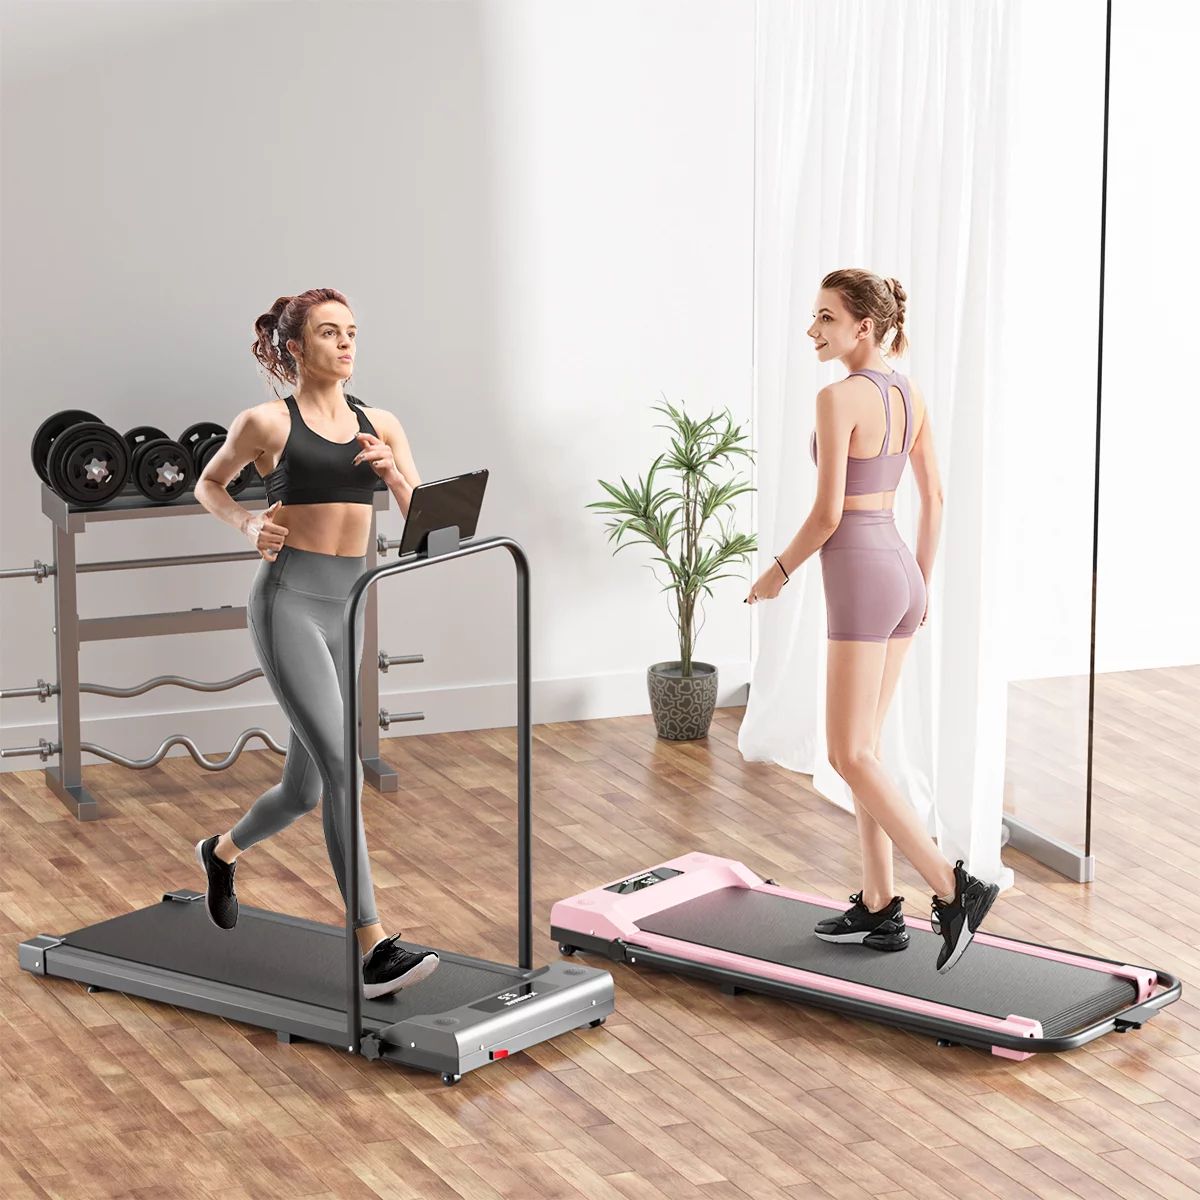 SINGES 2.25HP Foldable Electric Treadmill Family Treadmill with LCD Display and Pad Holder Motori... | Walmart (US)